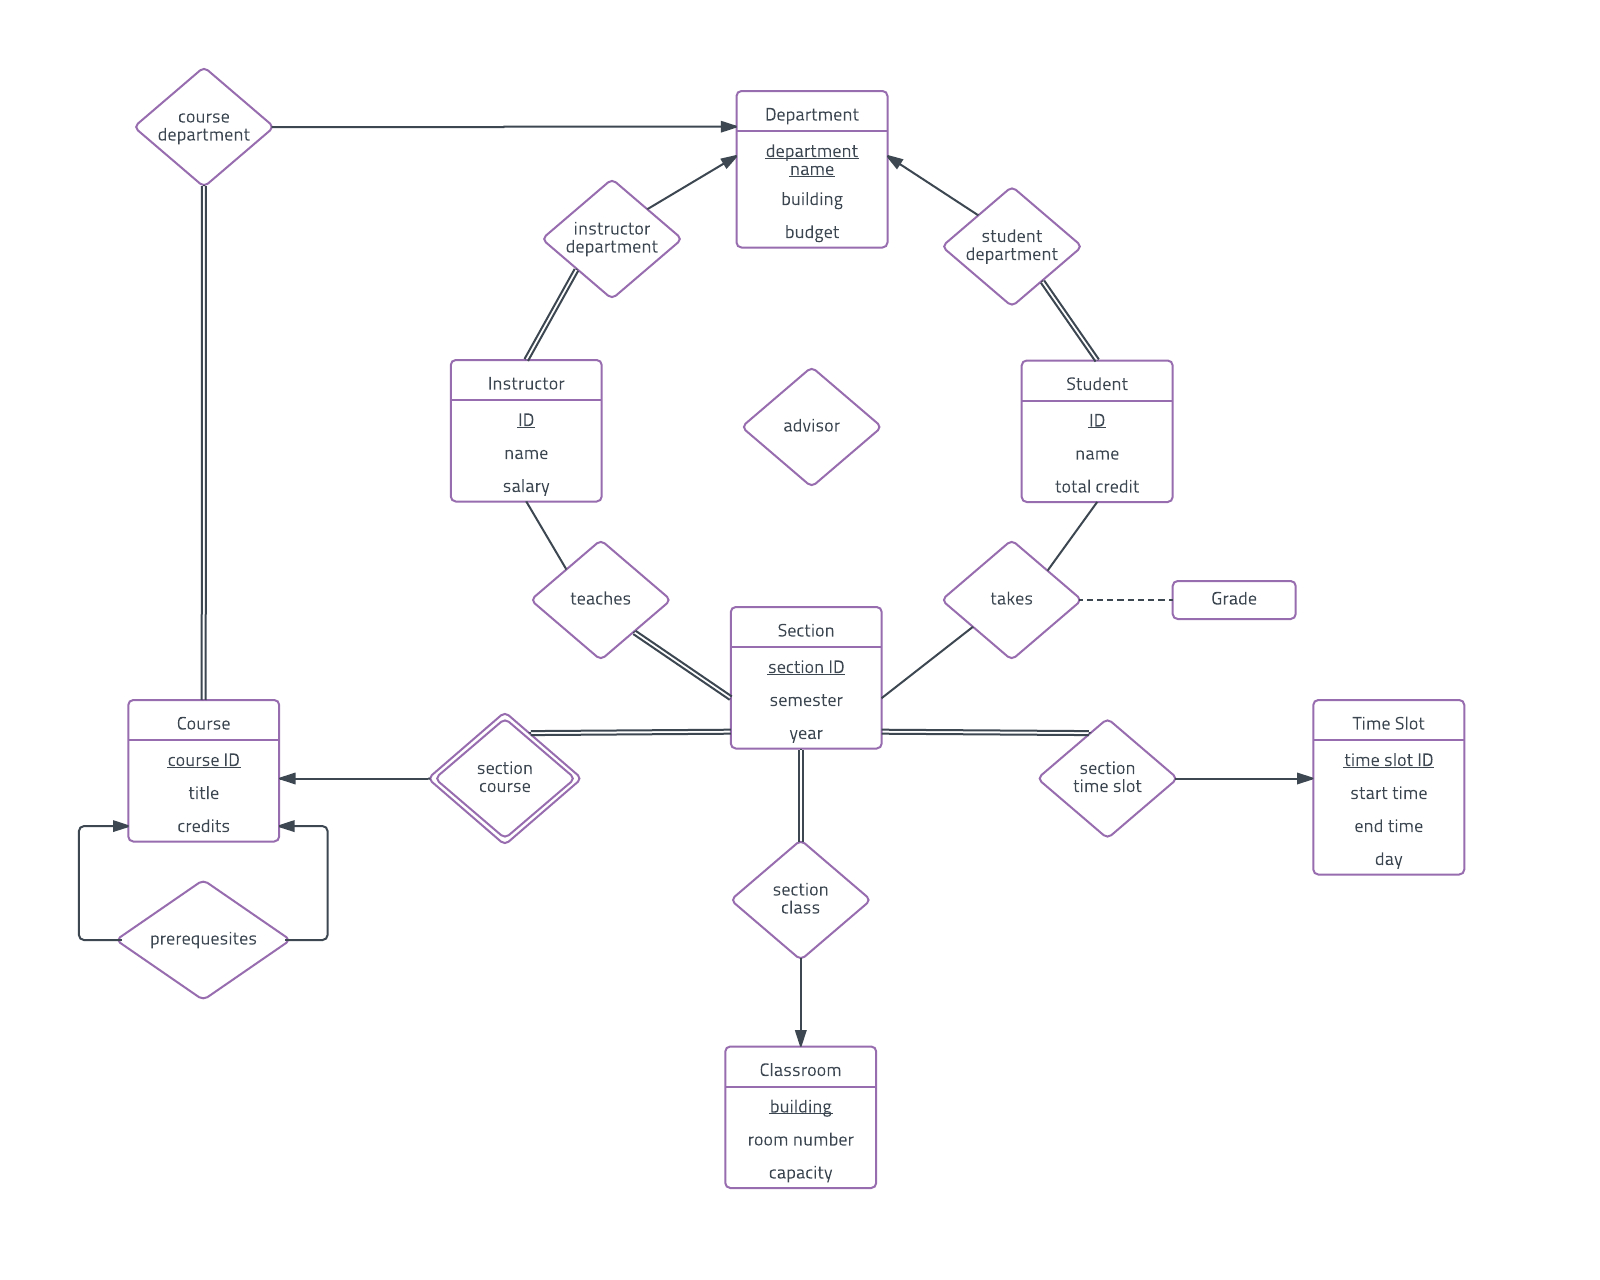 Er Diagram Examples And Templates | Lucidchart in Er Diagram Examples For Shop